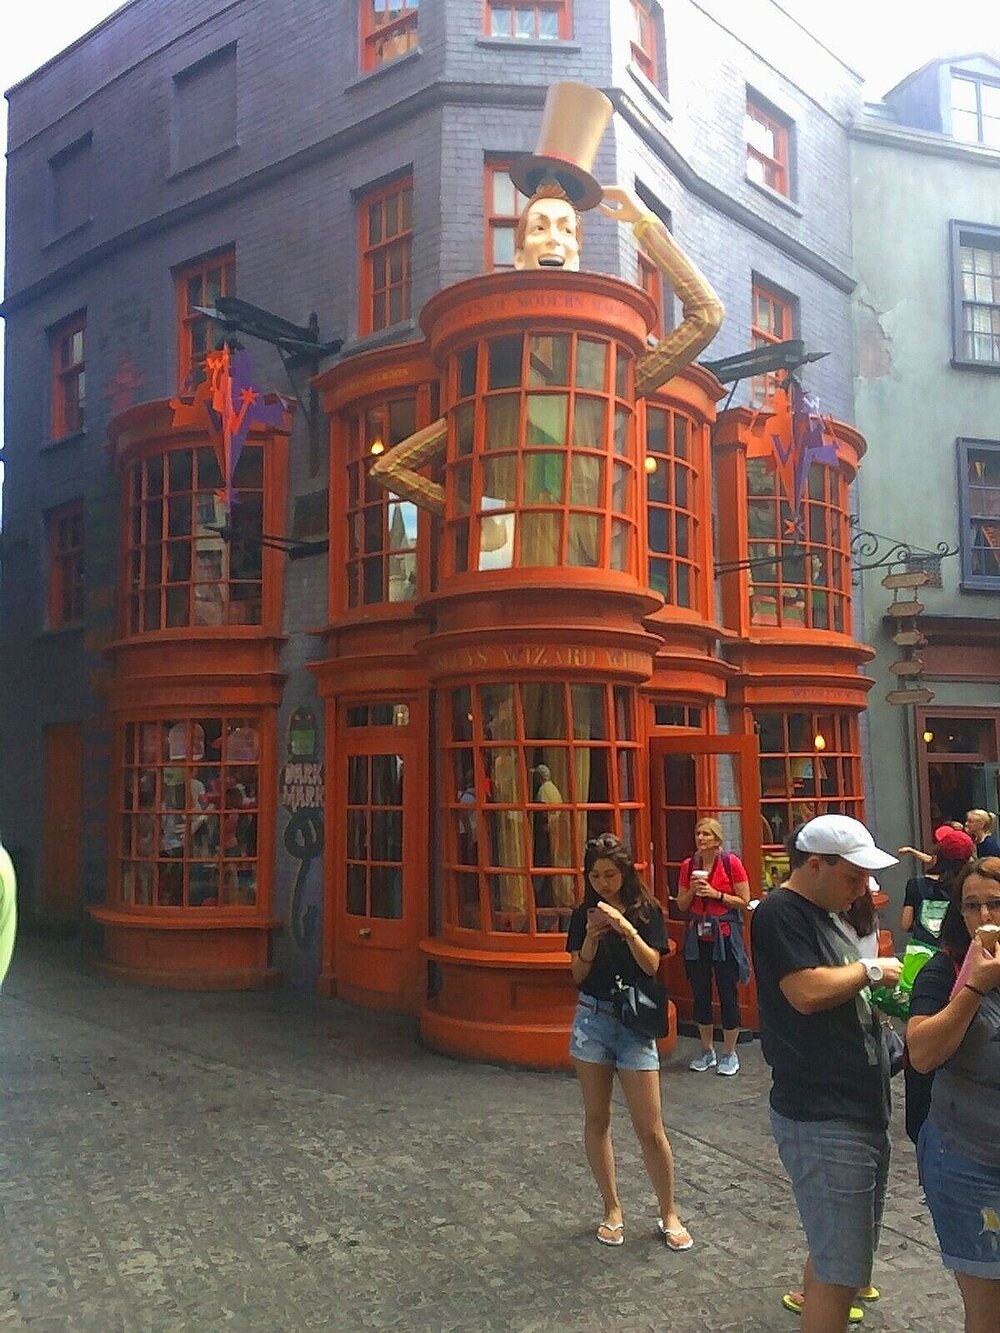 Fred and George joke shop; Weasley's Wizard Wheezes - Harry Potter World, Universal Orlando